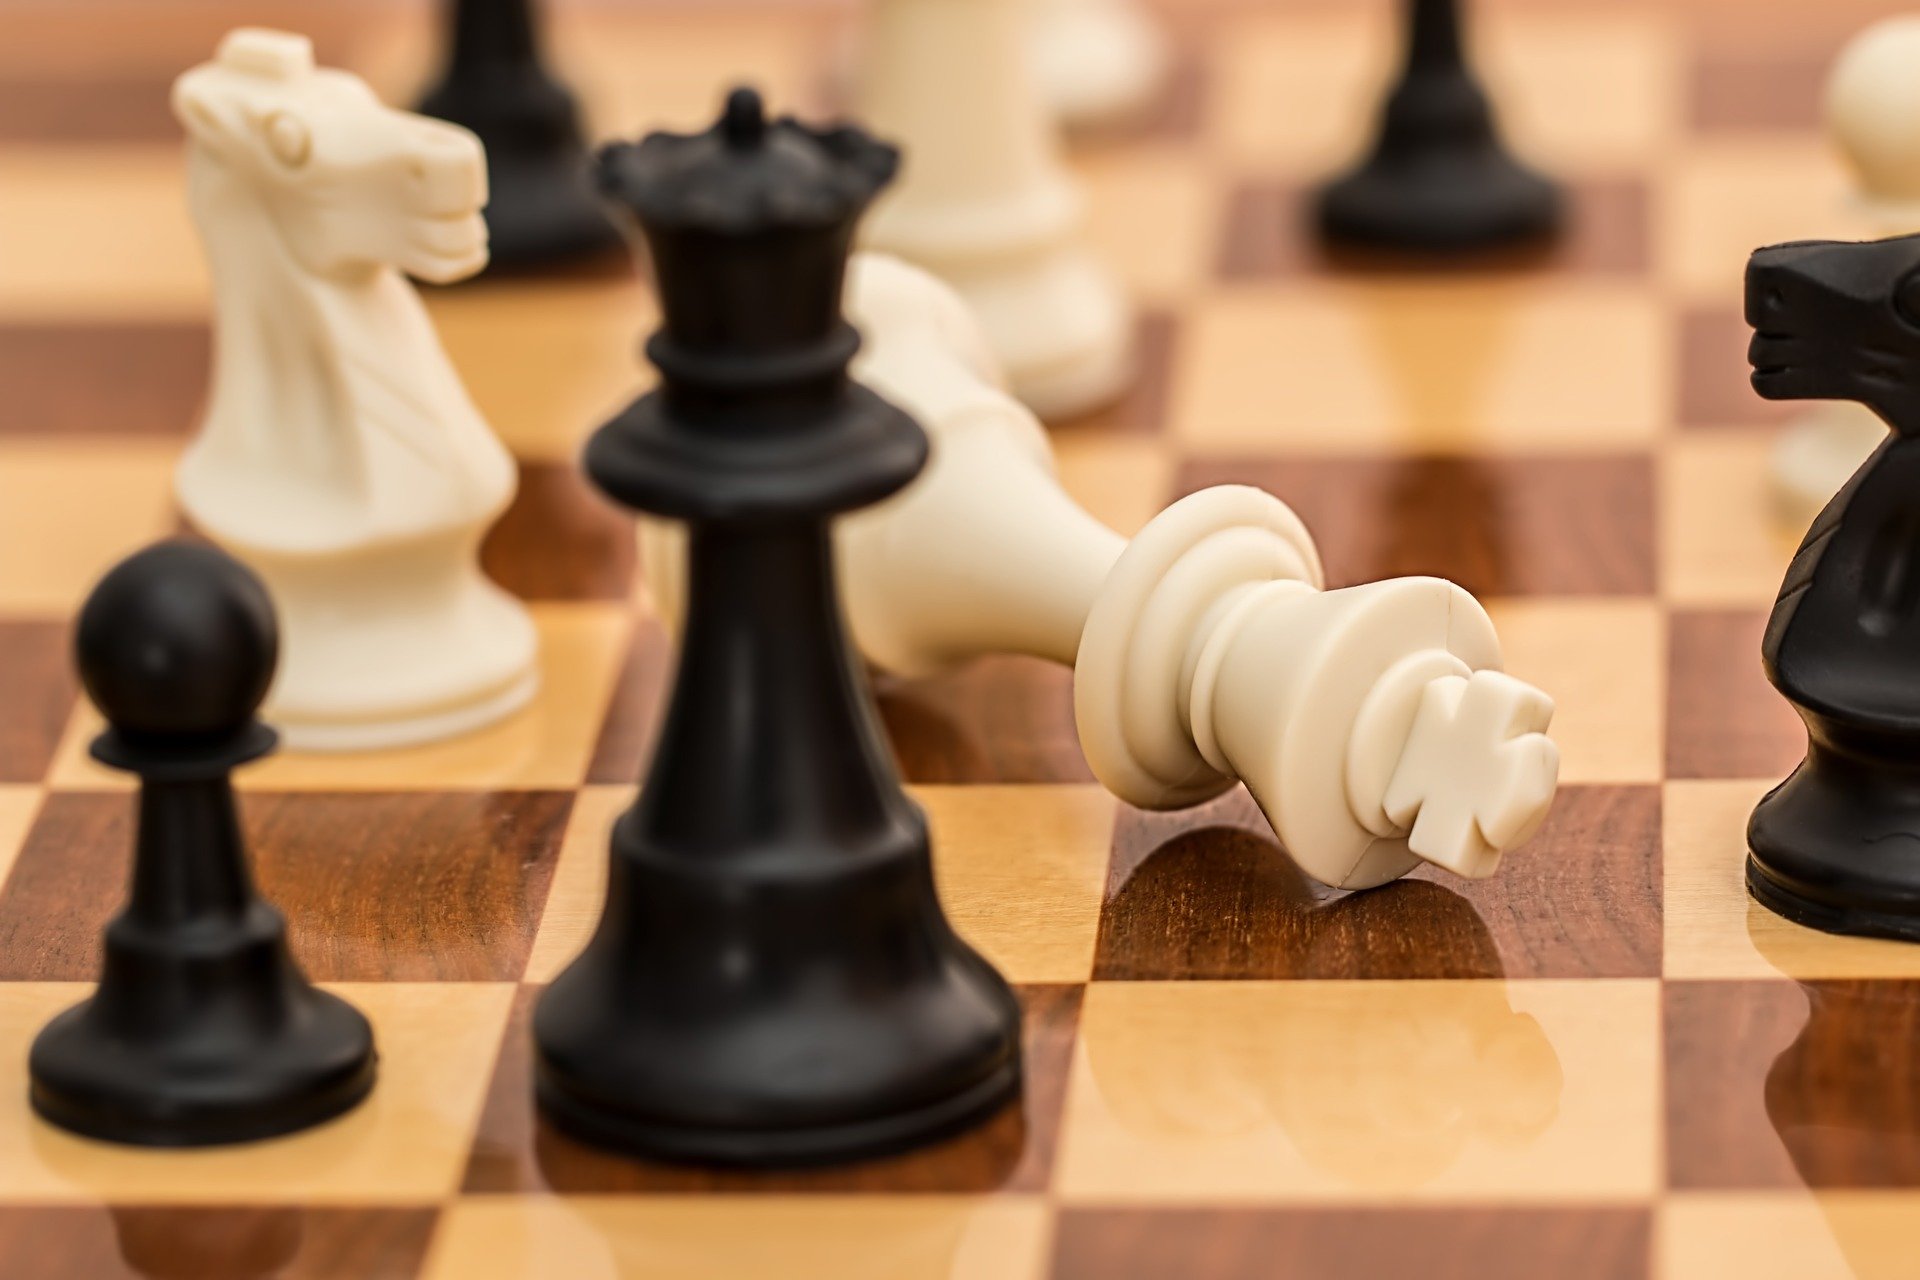 Women beat expectations when playing chess against men, according ...